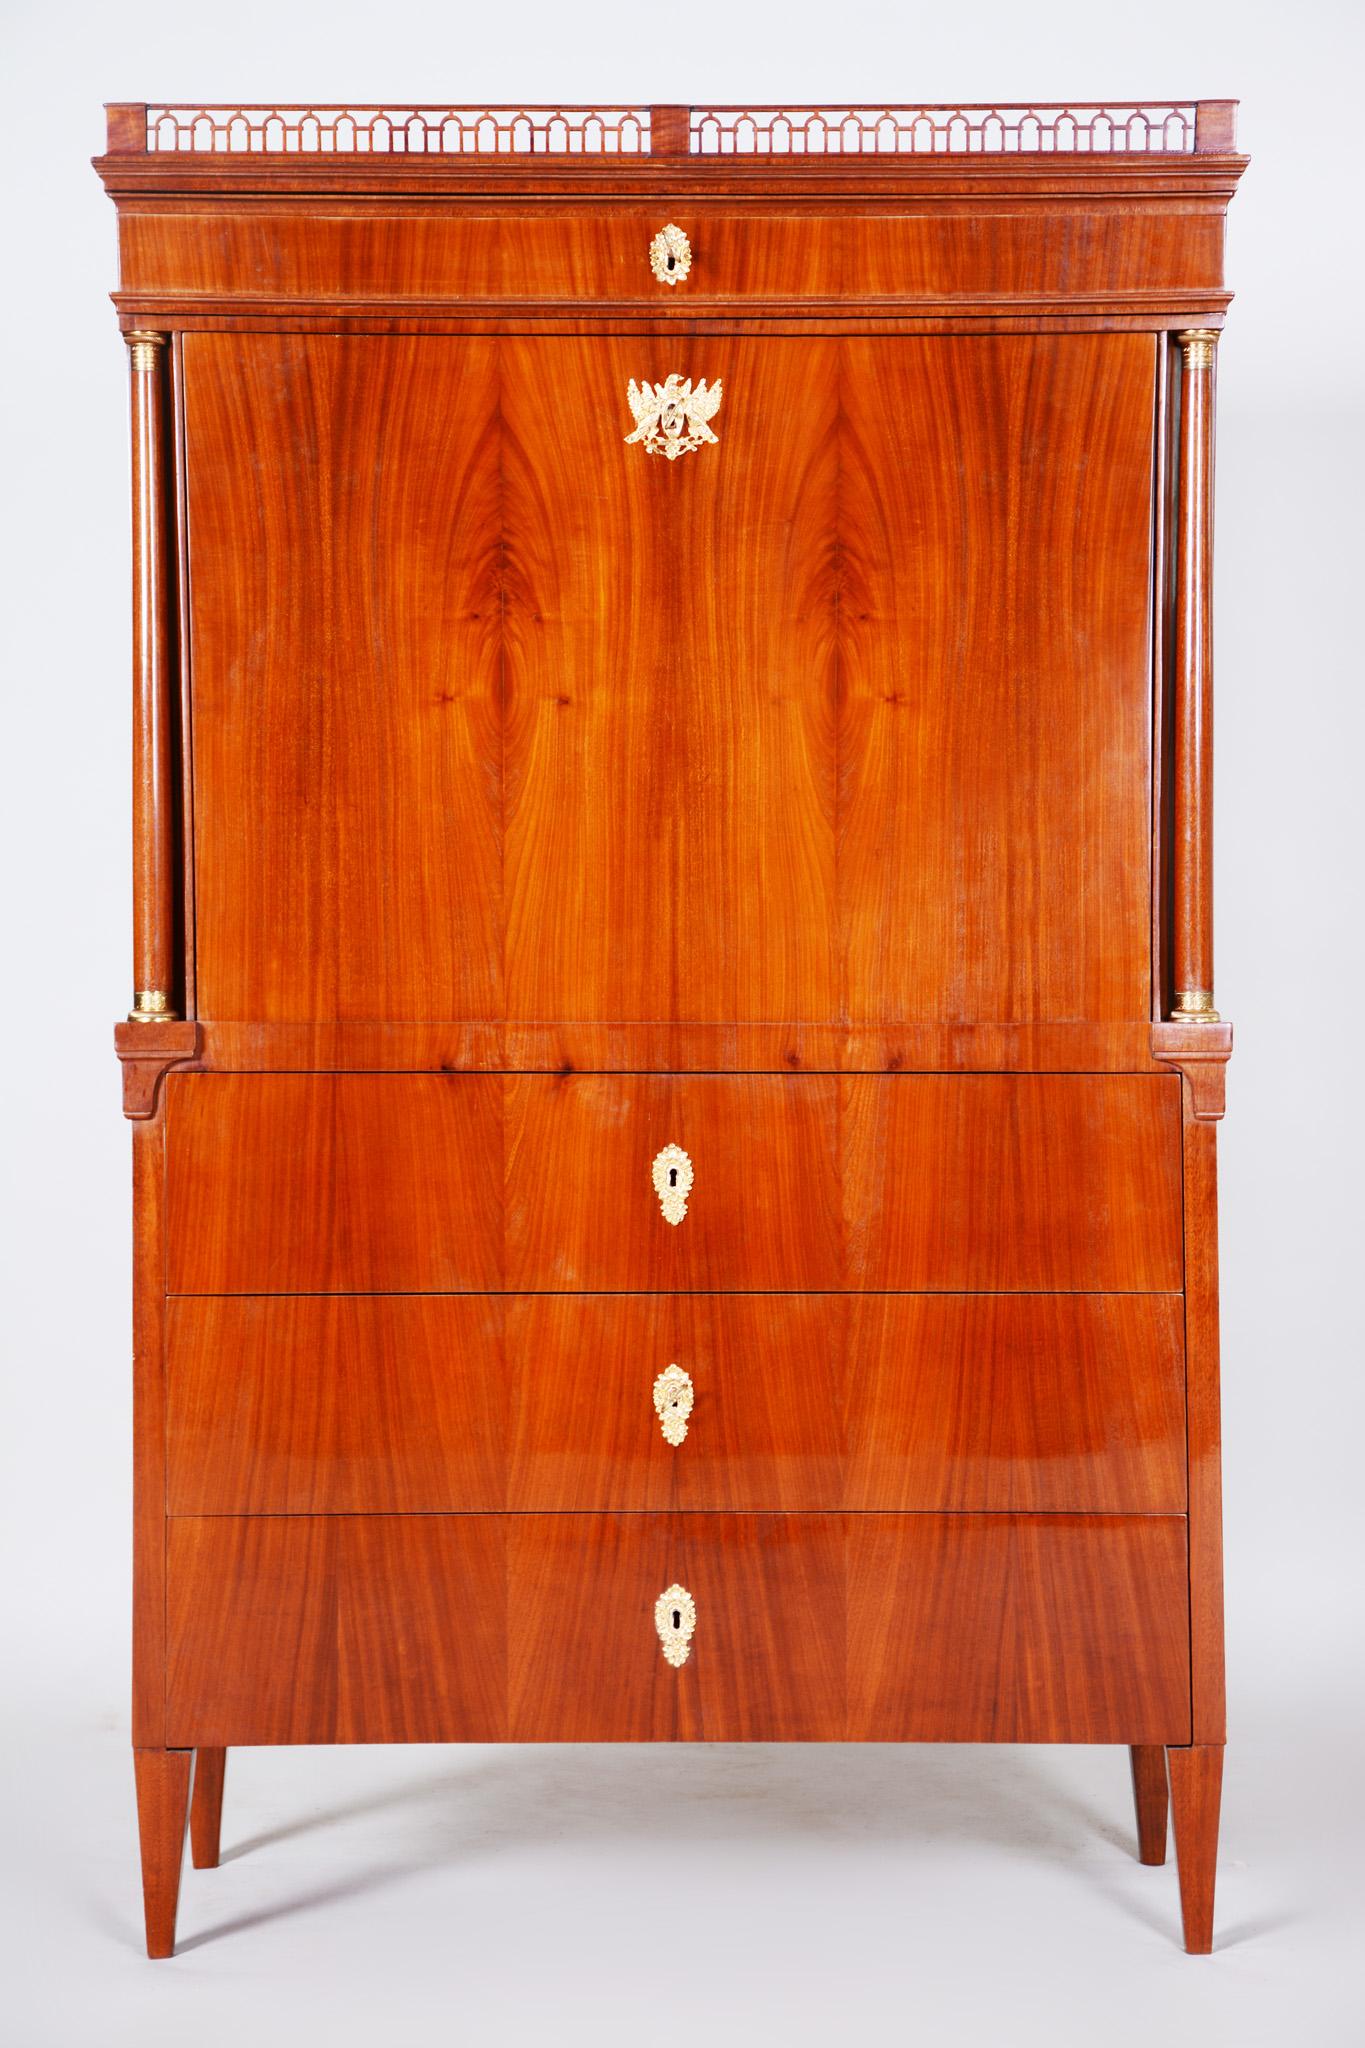 Empire secretary or writing desk, (Cylinder)
Material: Mahogany. 
Completely restored, Shellac polish.
Period: 1820-1829
Source: Austria, Wien.